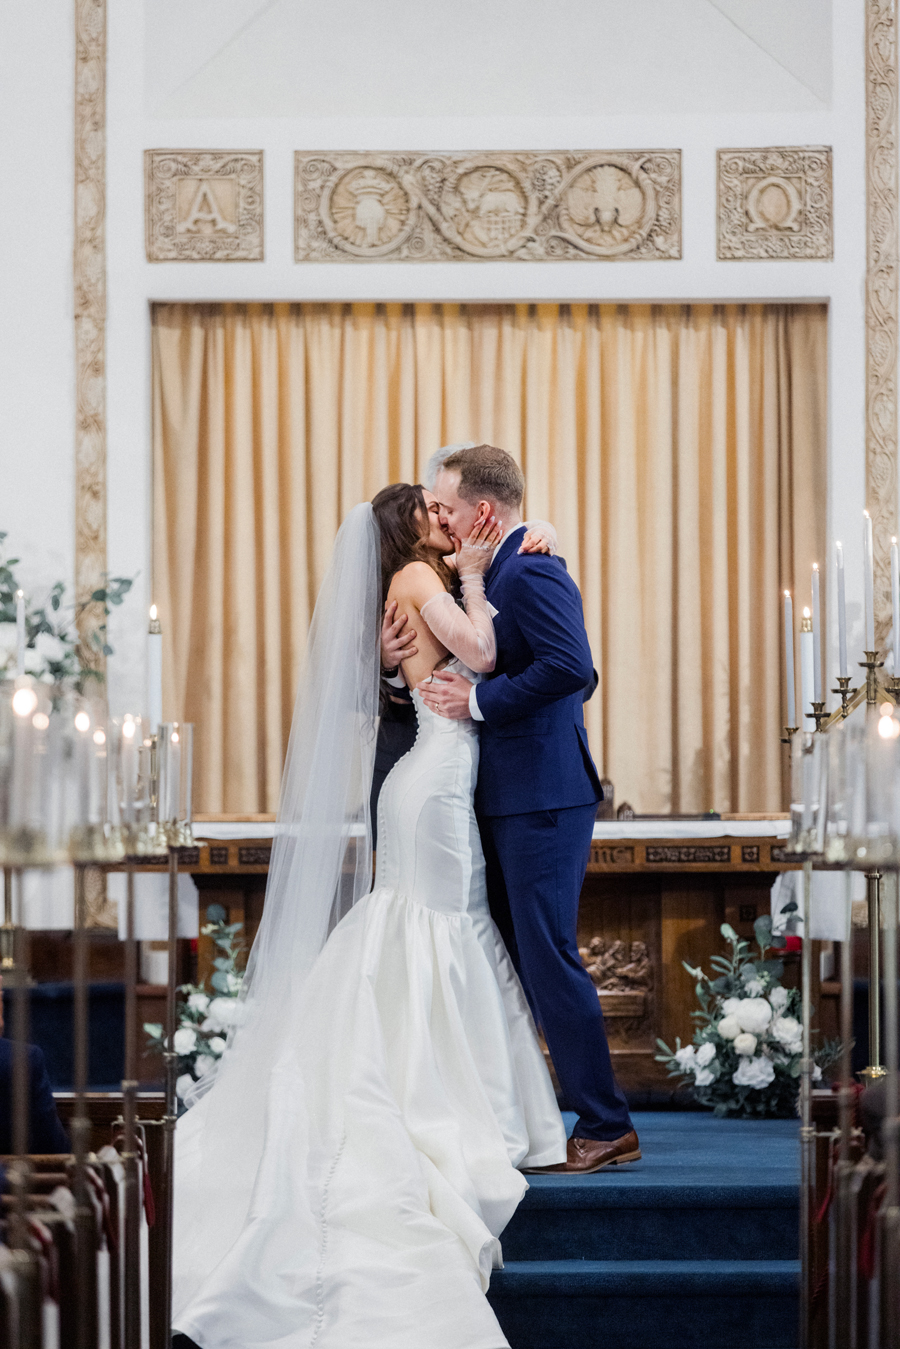 The bride and groom get married at First Christian Church before their The Atrium on Tenth wedding in Columbia, Missouri by Love Tree Studios.